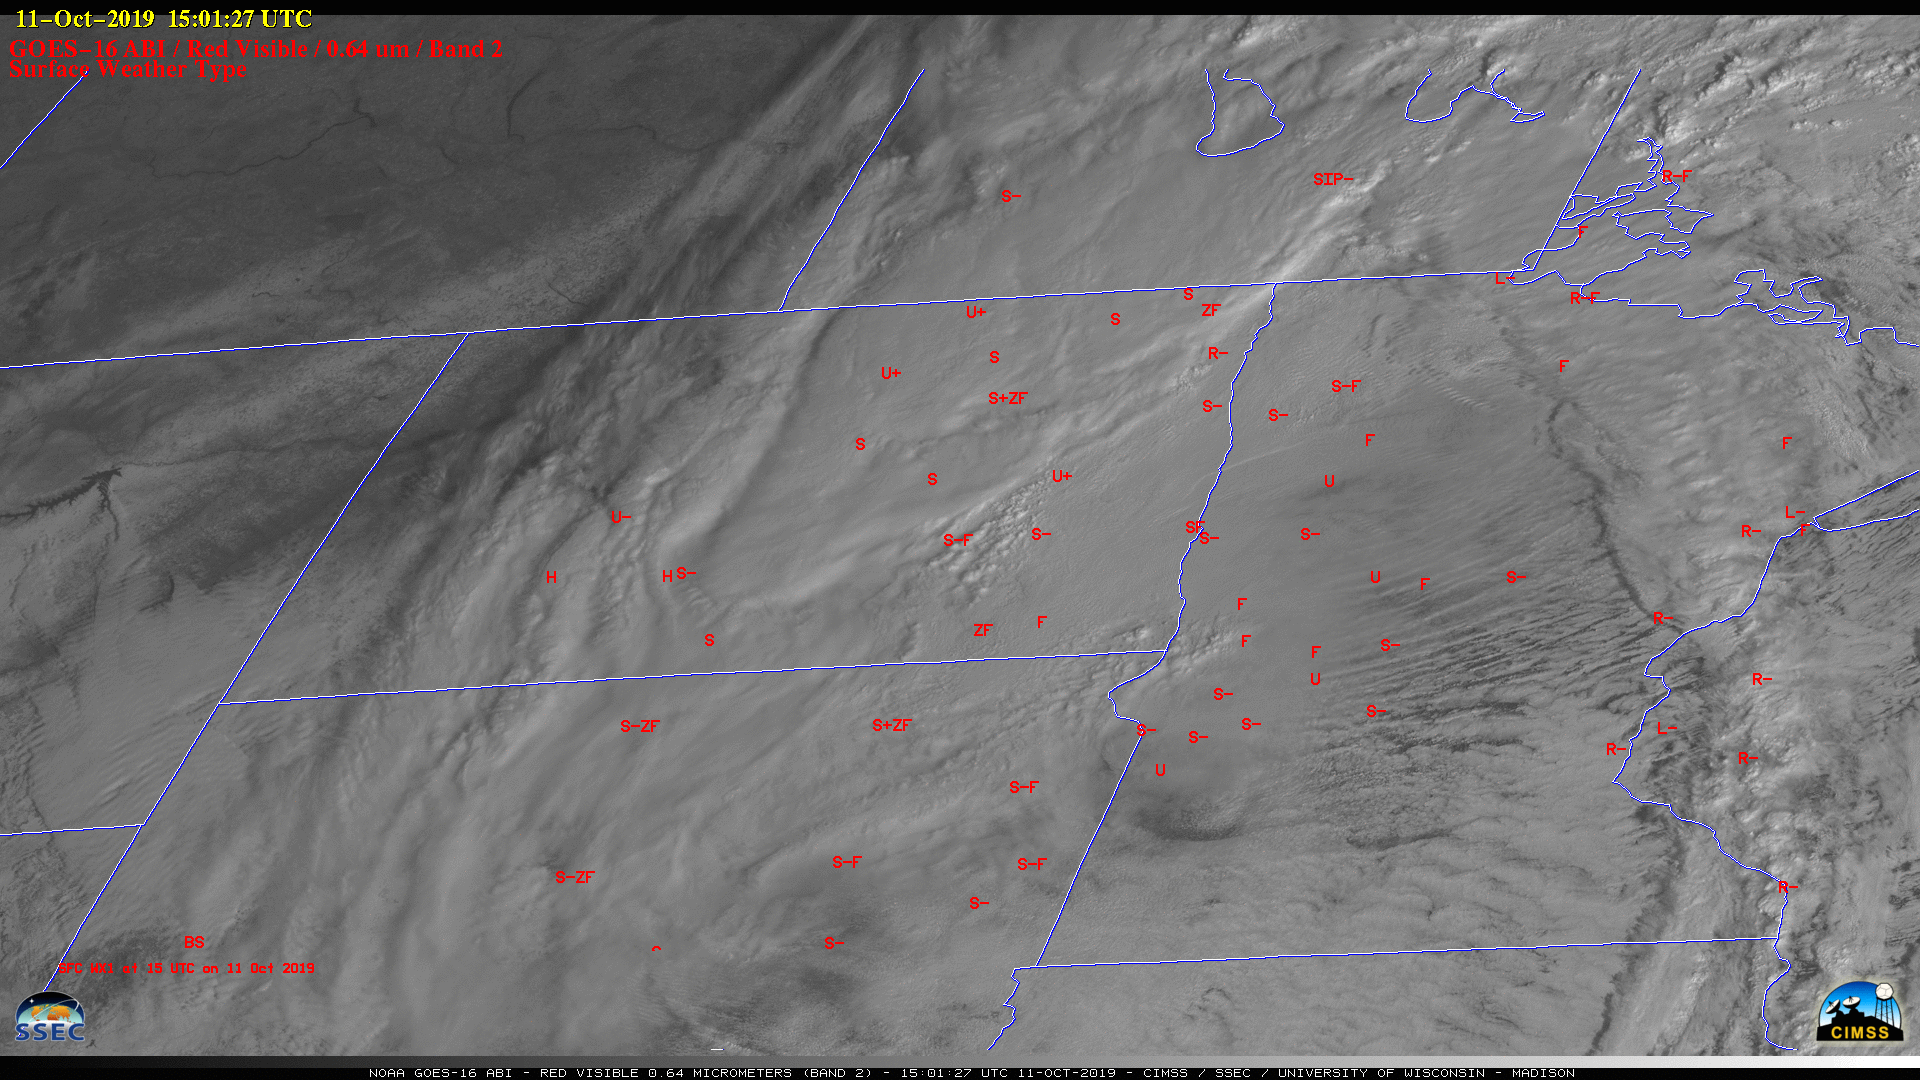 GOES-16 "Red" Visible (0.64 µm) images on 10/11/12 October, with hourly precipitation type plotted in red [click to play animation | MP4]